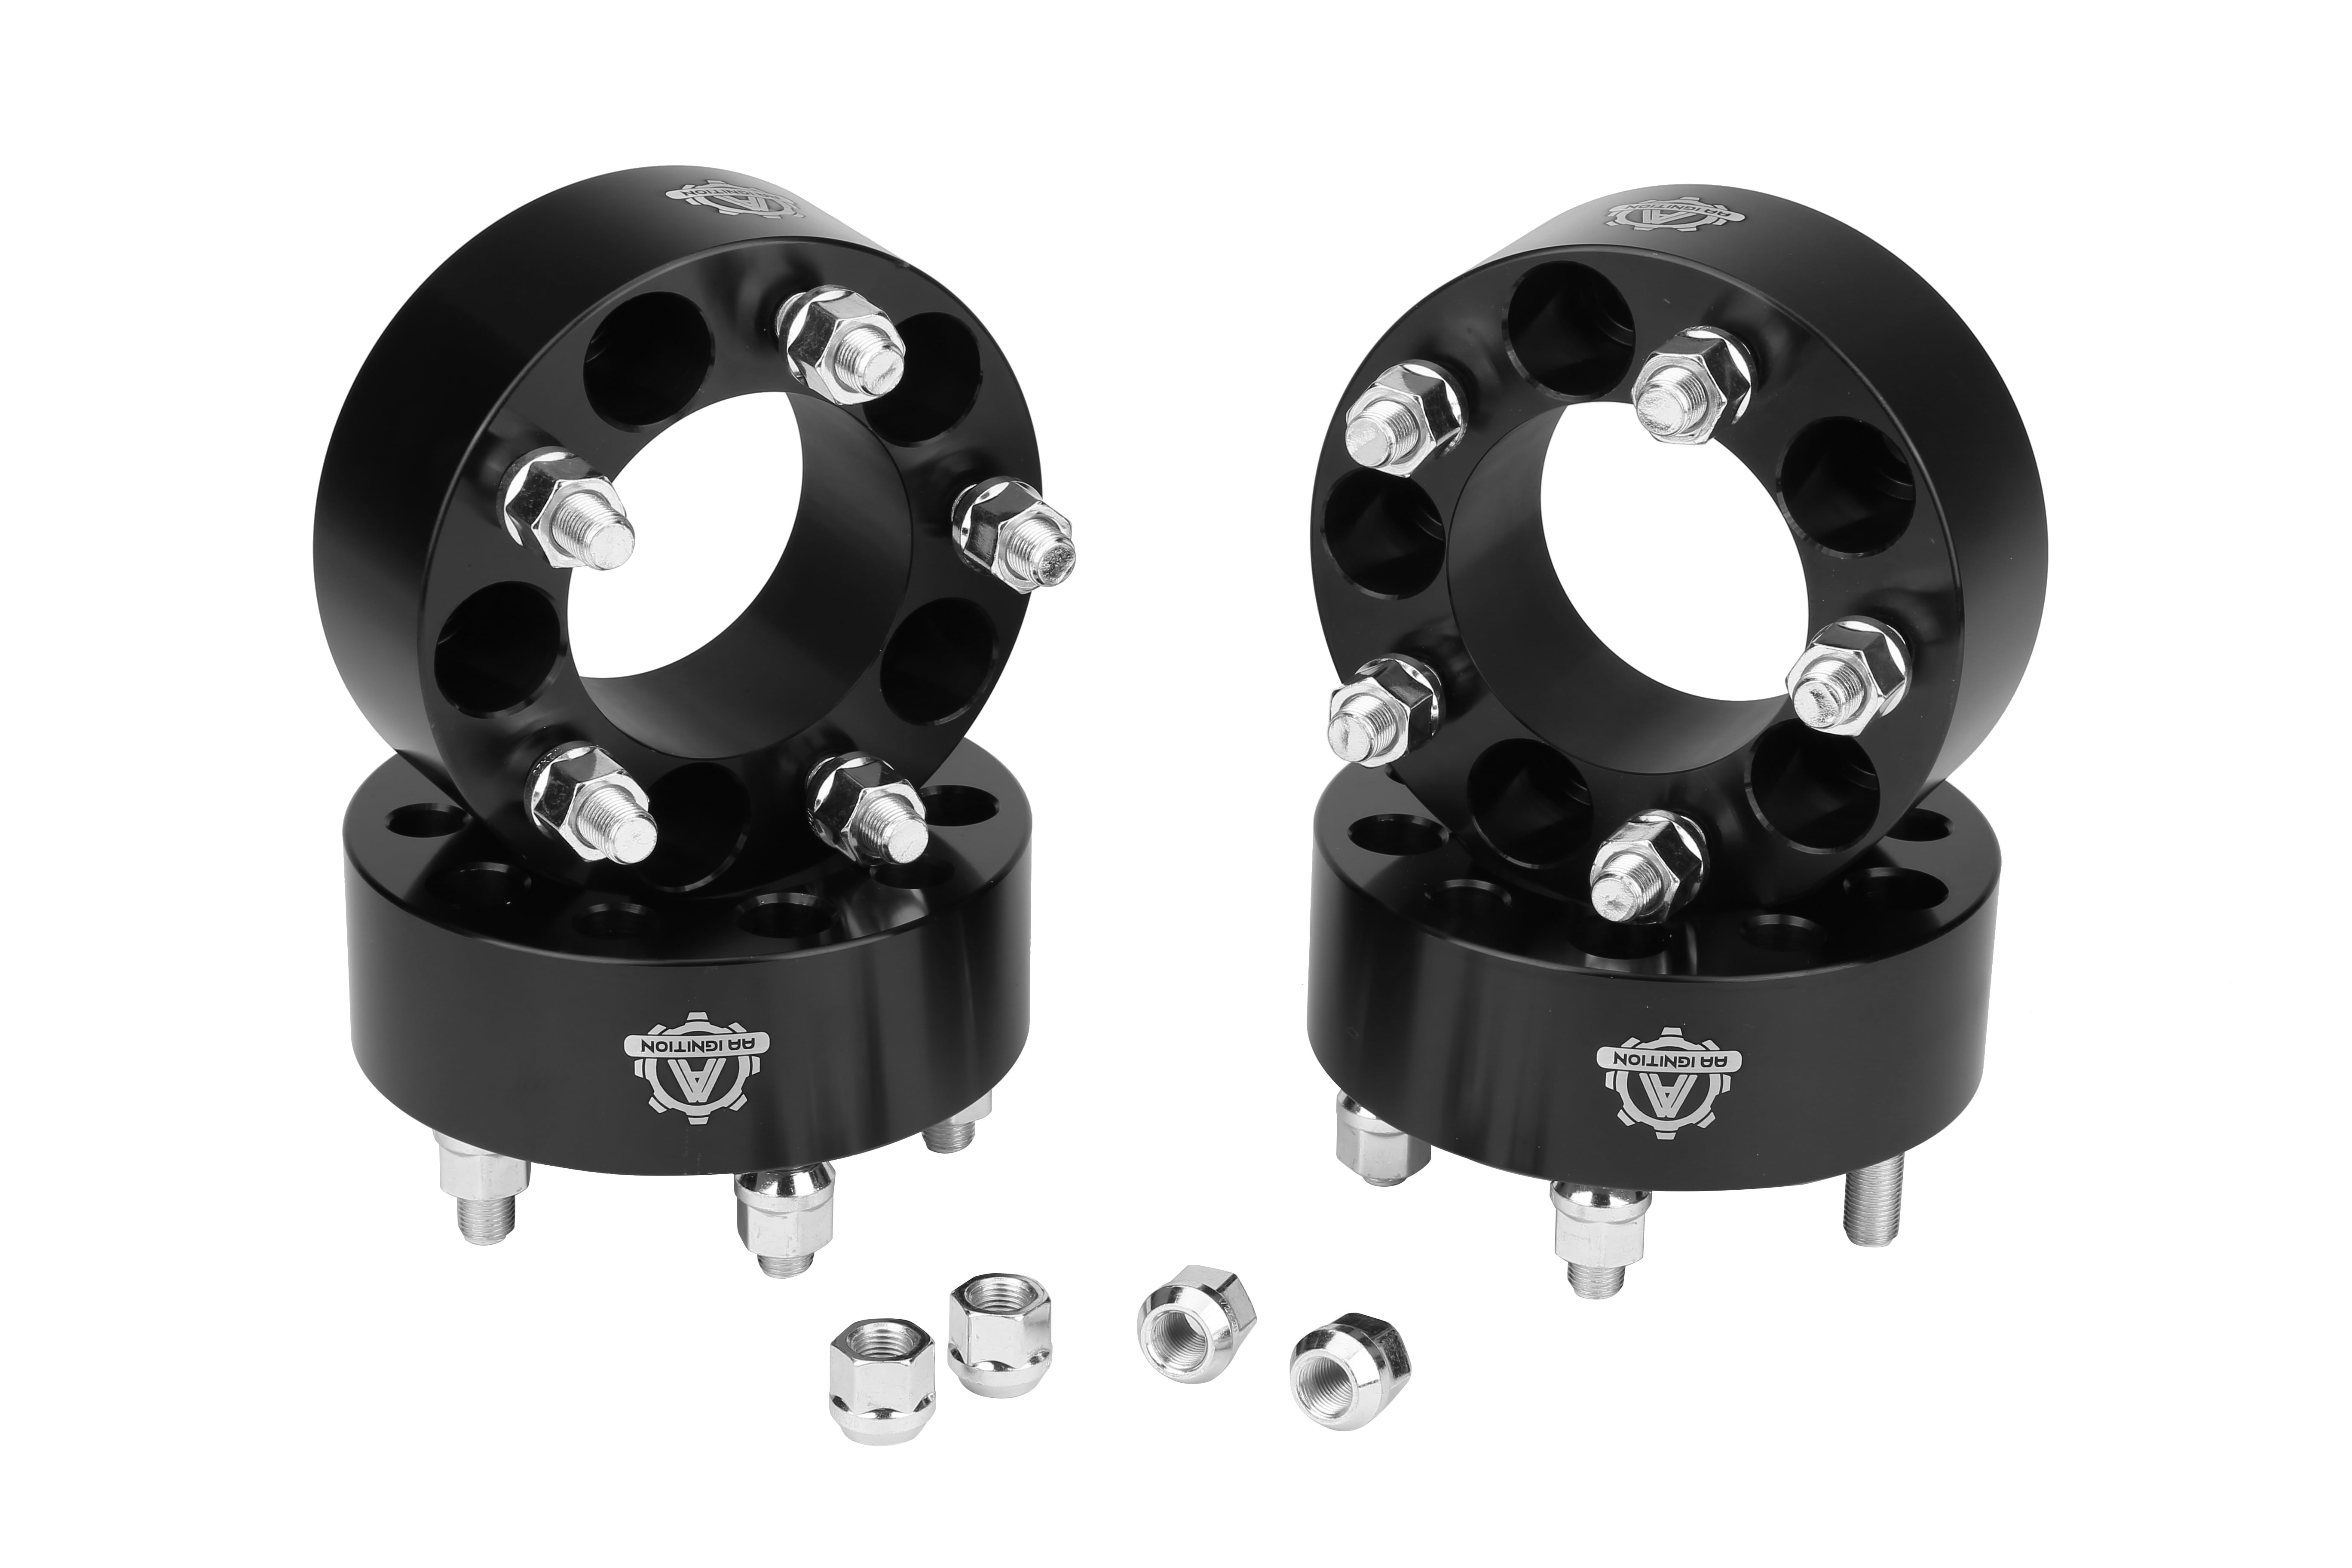 Wheel Spacer Set of 4 Black - 5 Lug  Bolt Pattern  Lug  Centric  Bore - 2 Inches Thick - Compatible with Jeep and Ford  Vehicles - Wrangler YJ,